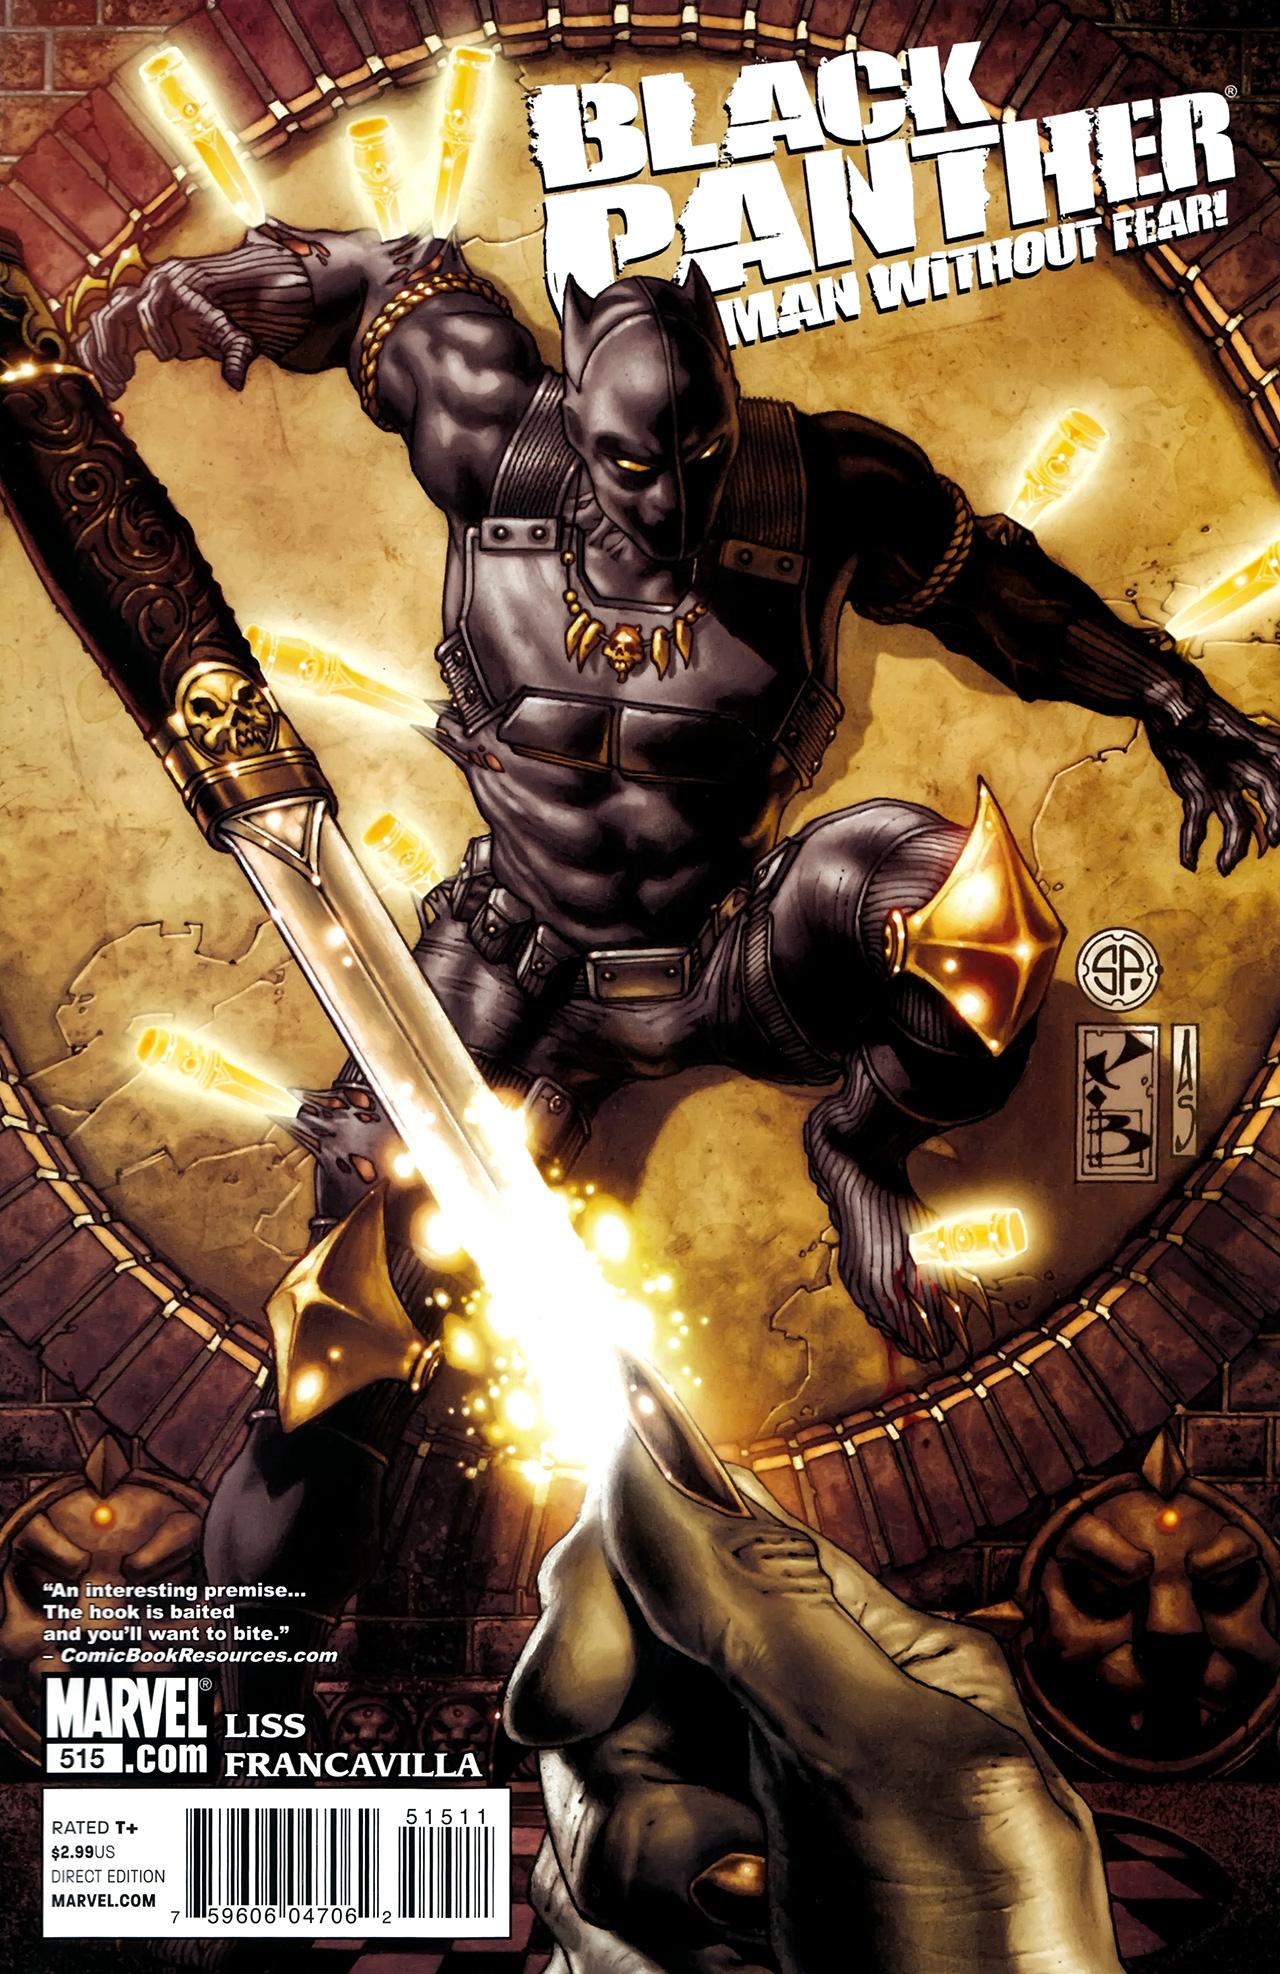 Black Panther: The Man Without Fear Vol. 1 #515